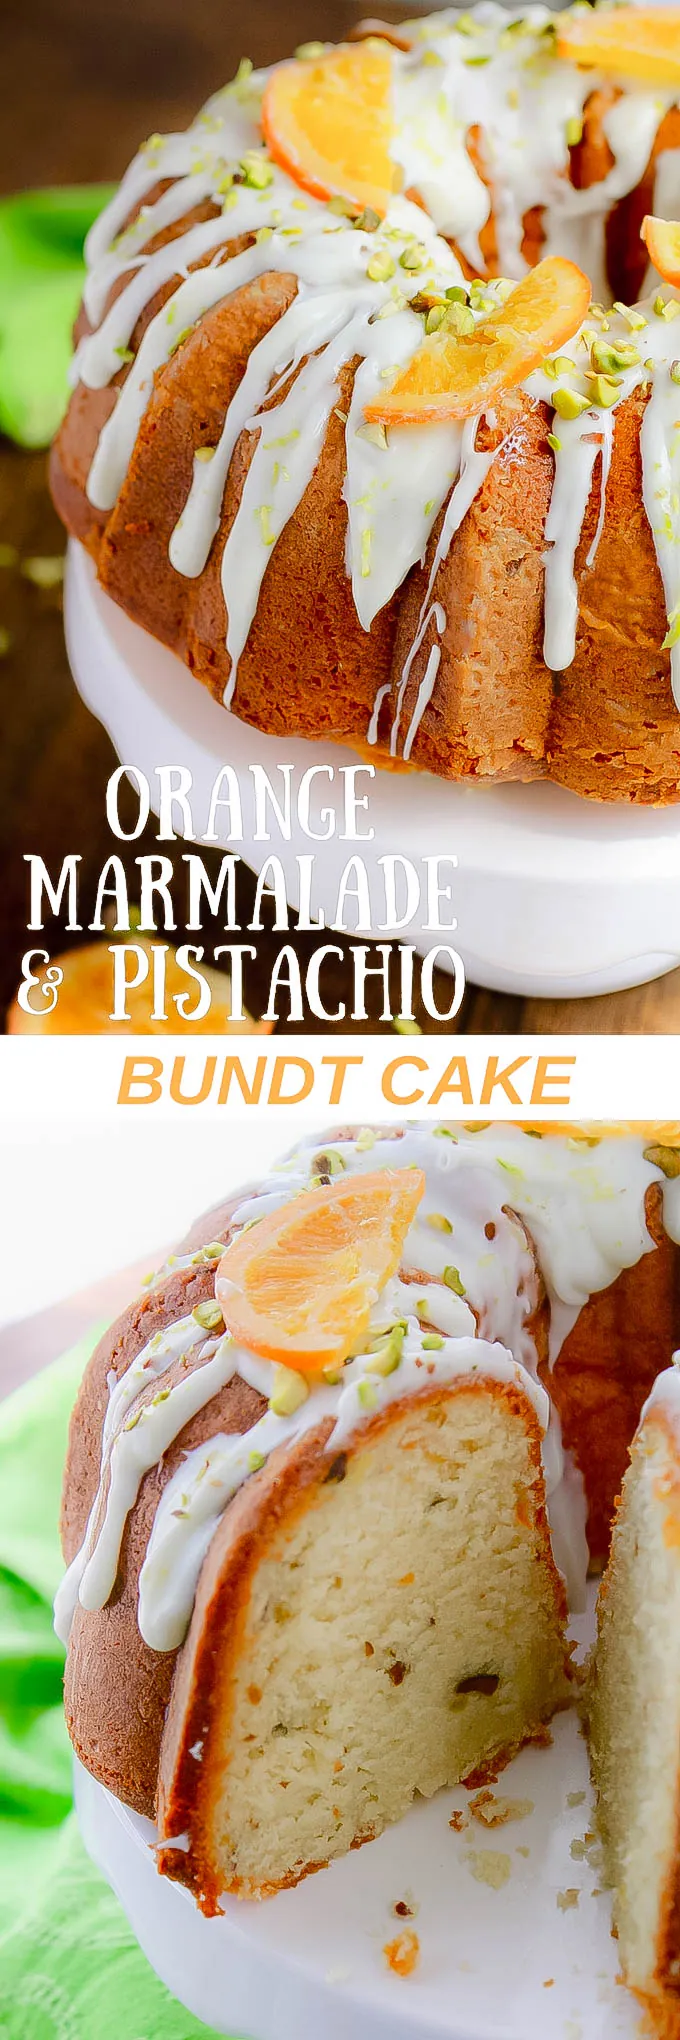 Orange Marmalade-Pistachio Bundt Cake is perfect for the Easter holiday or any special occasion. You'll swoon over Orange Marmalade-Pistachio Bundt Cake.